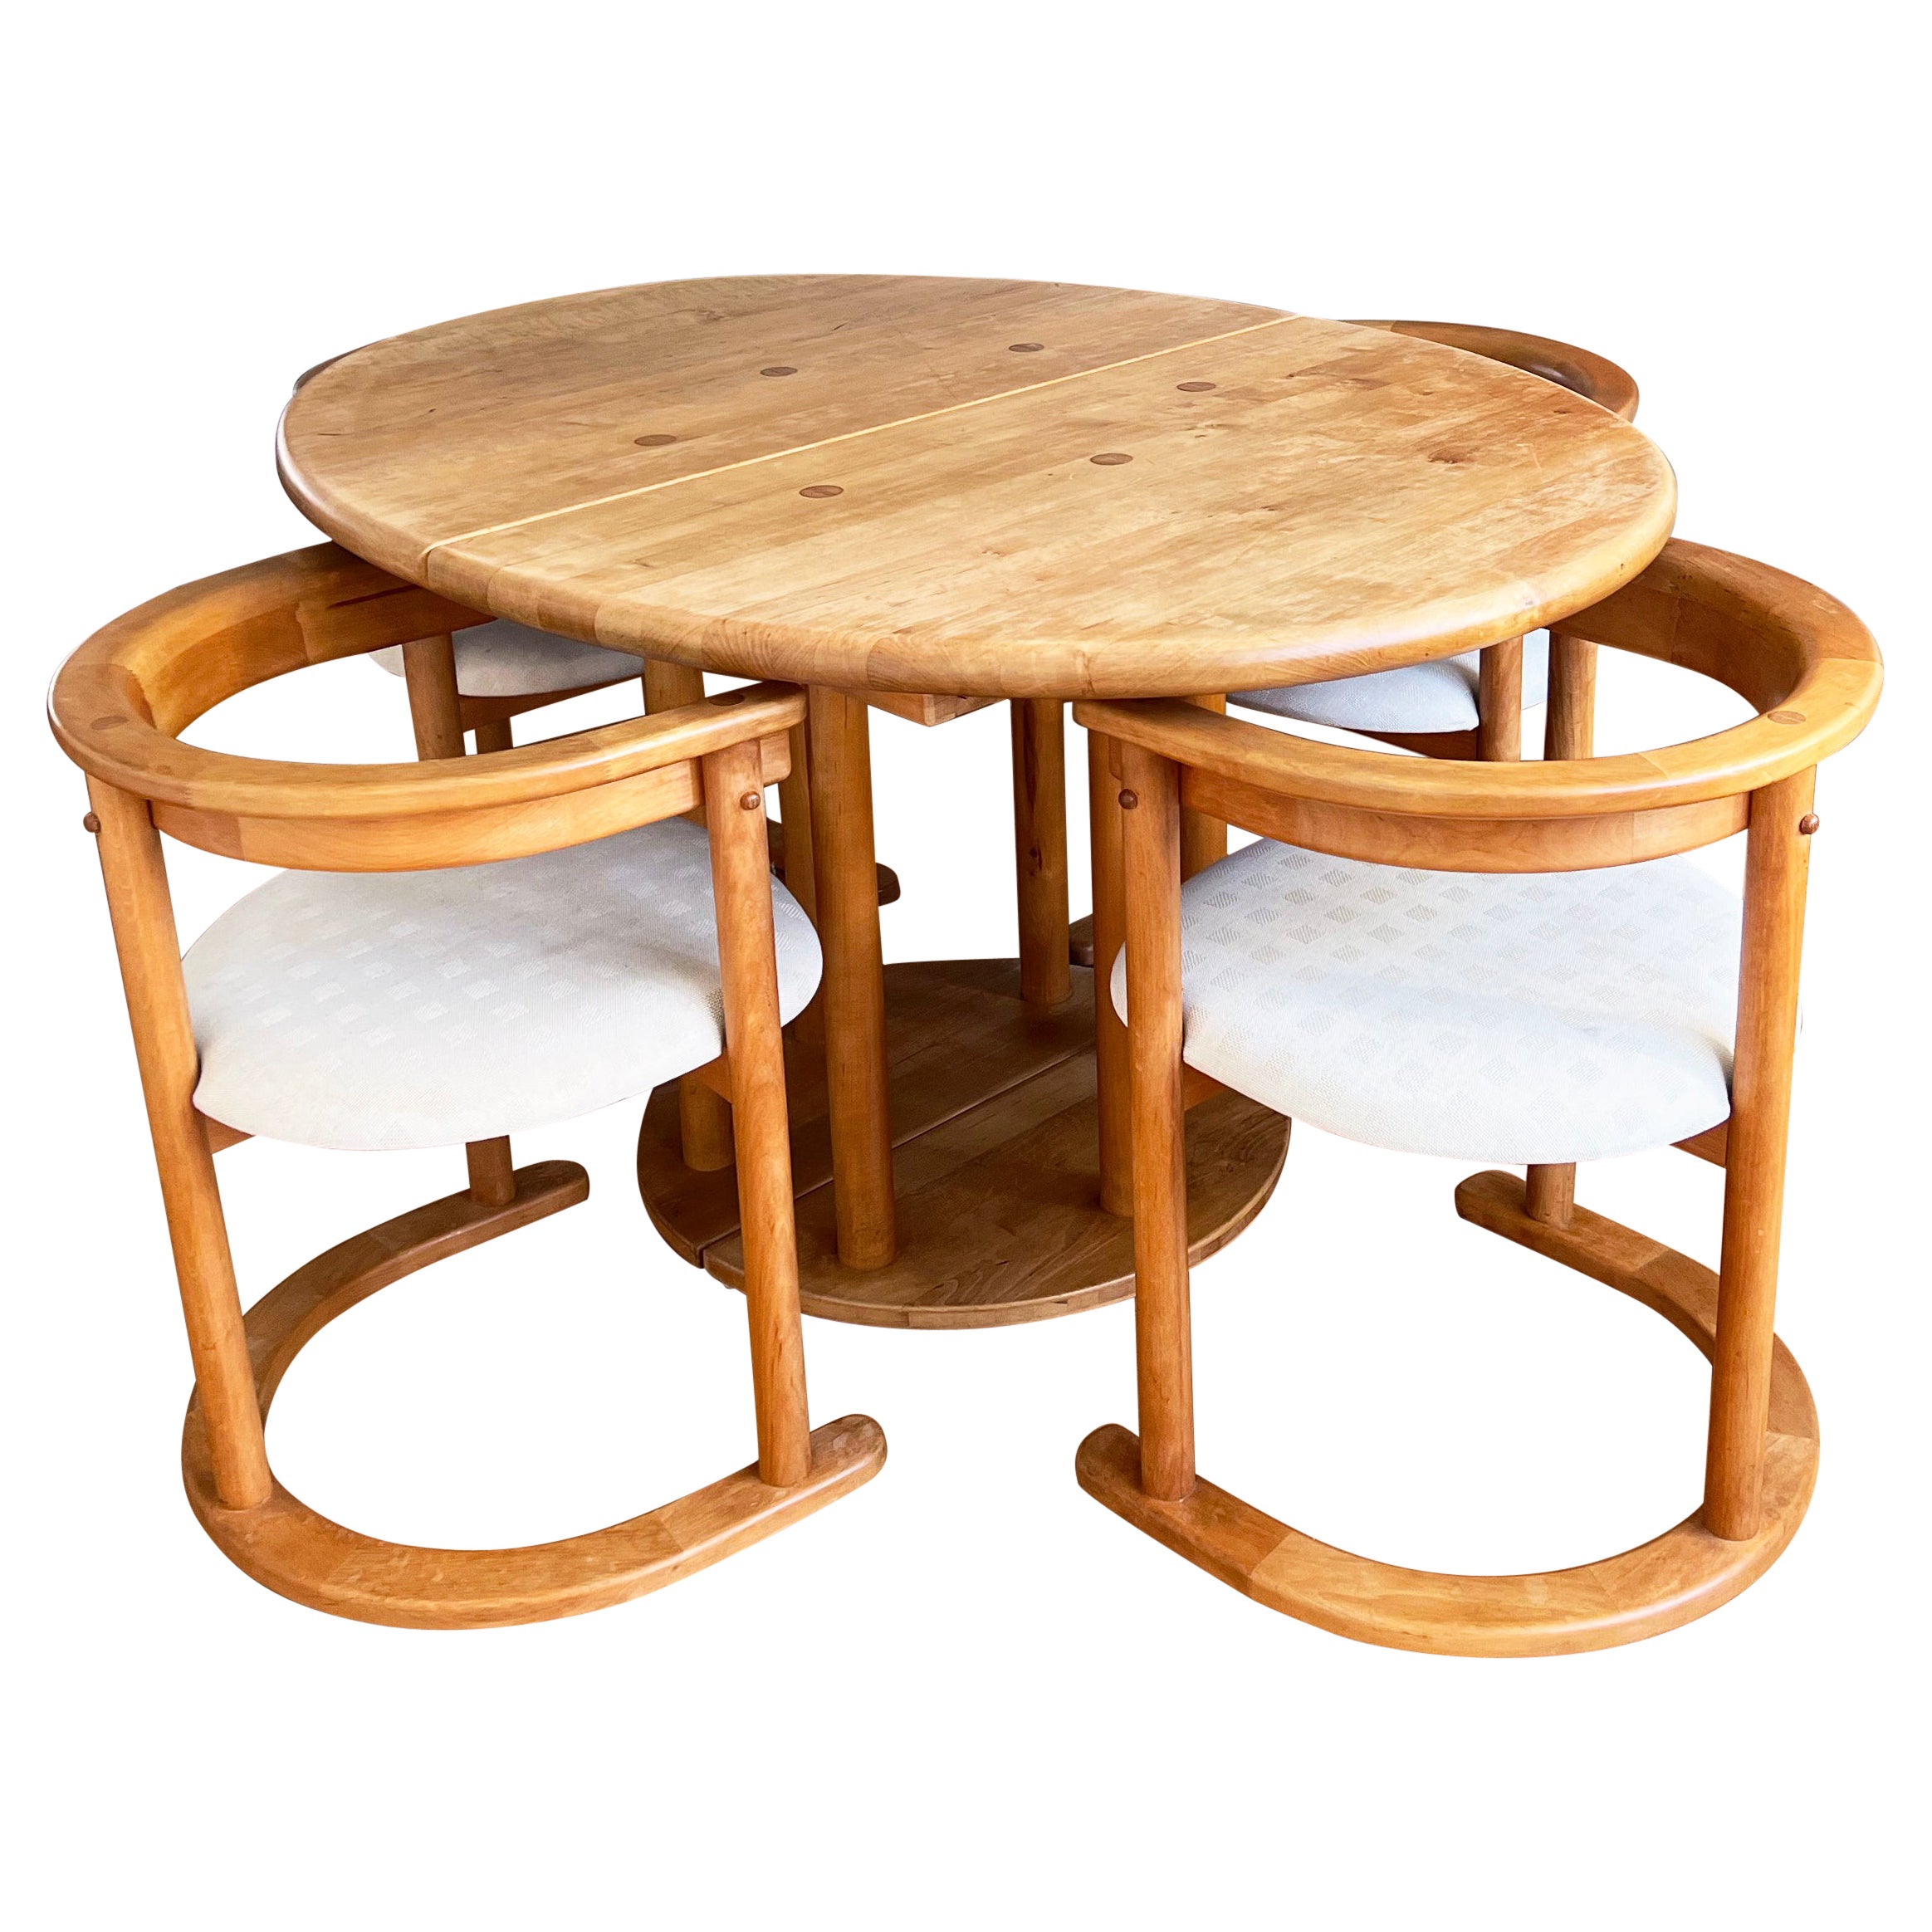 Round Post Modern Brutalist MCM Beech Dining Table + 6 Chairs, 9 Pcs Set For Sale